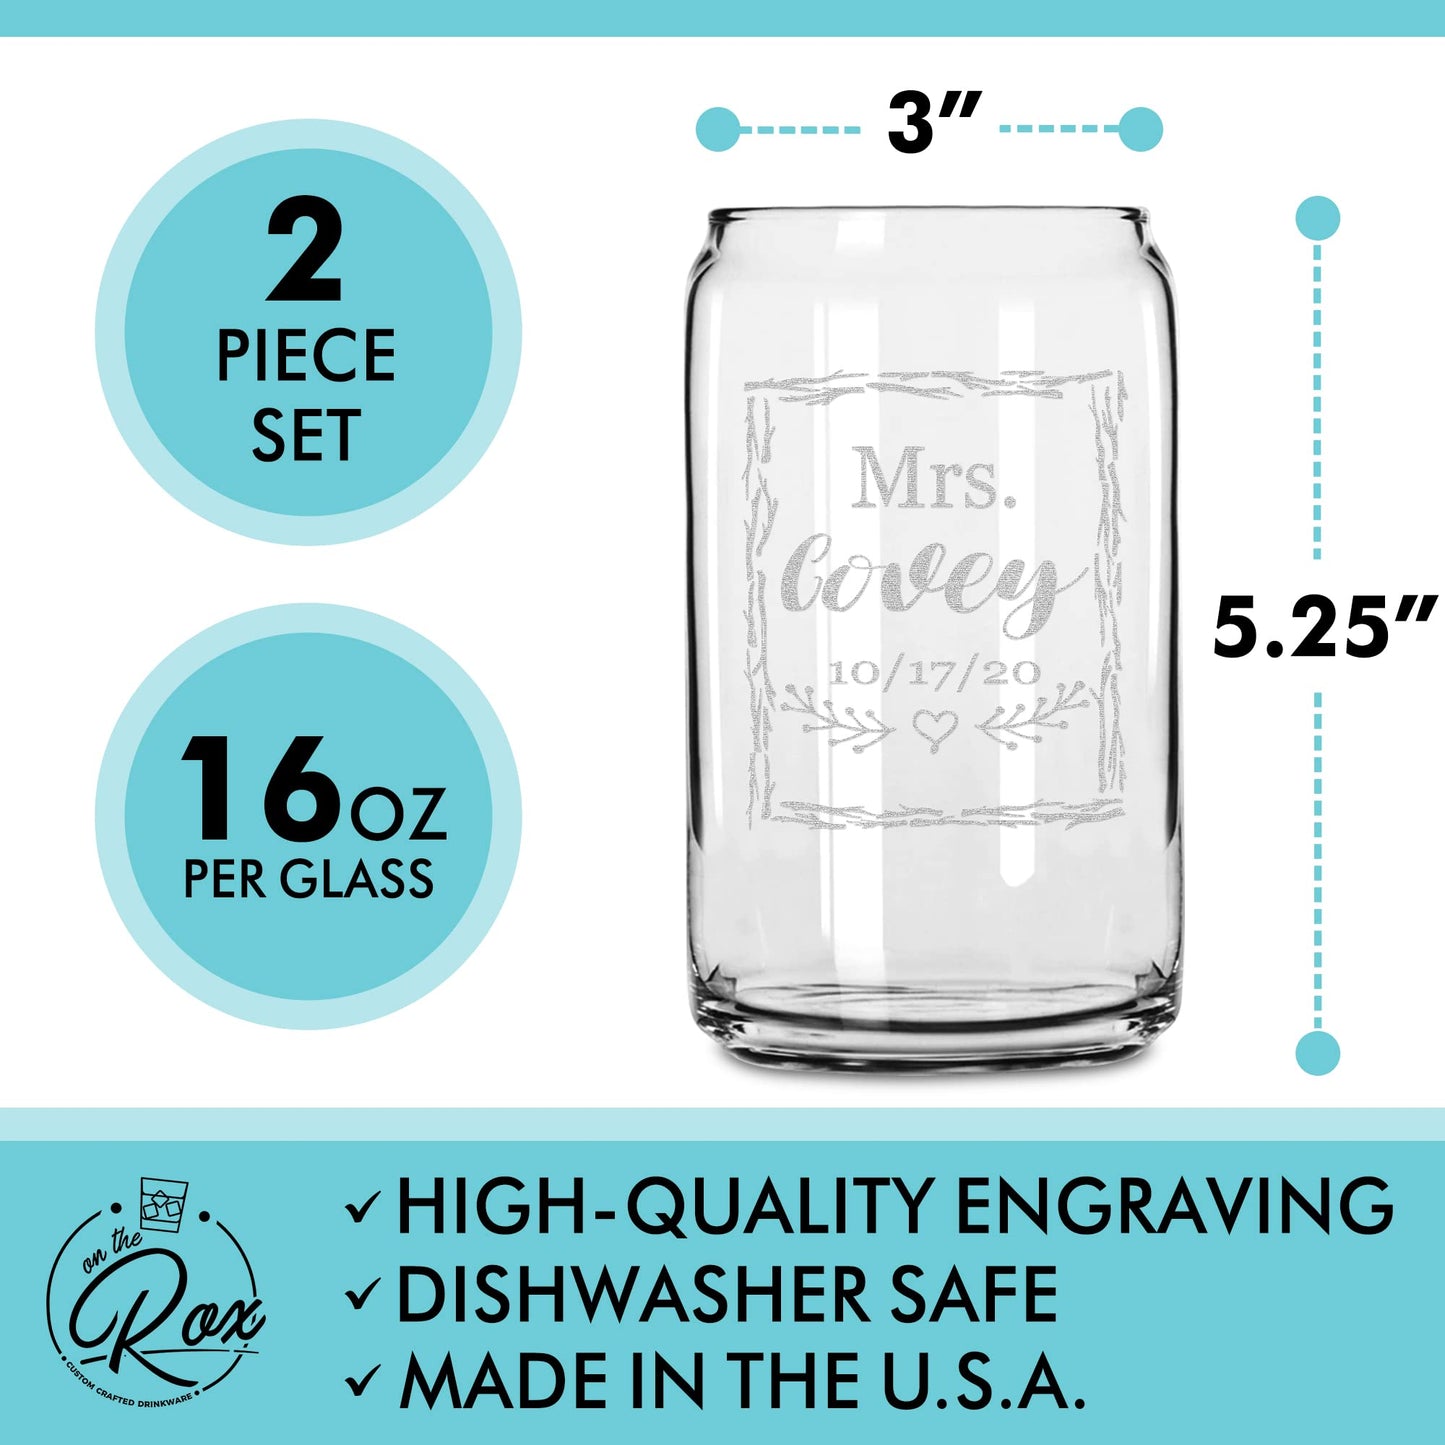 Two Custom Engraved Beer Can Glasses, For the Bride and Groom, Mr. And Mrs. Last Name Wedding Date Rustic Gift for Couple, His And Hers, Anniversary Present, Customized Glassware for Outdoor Reception